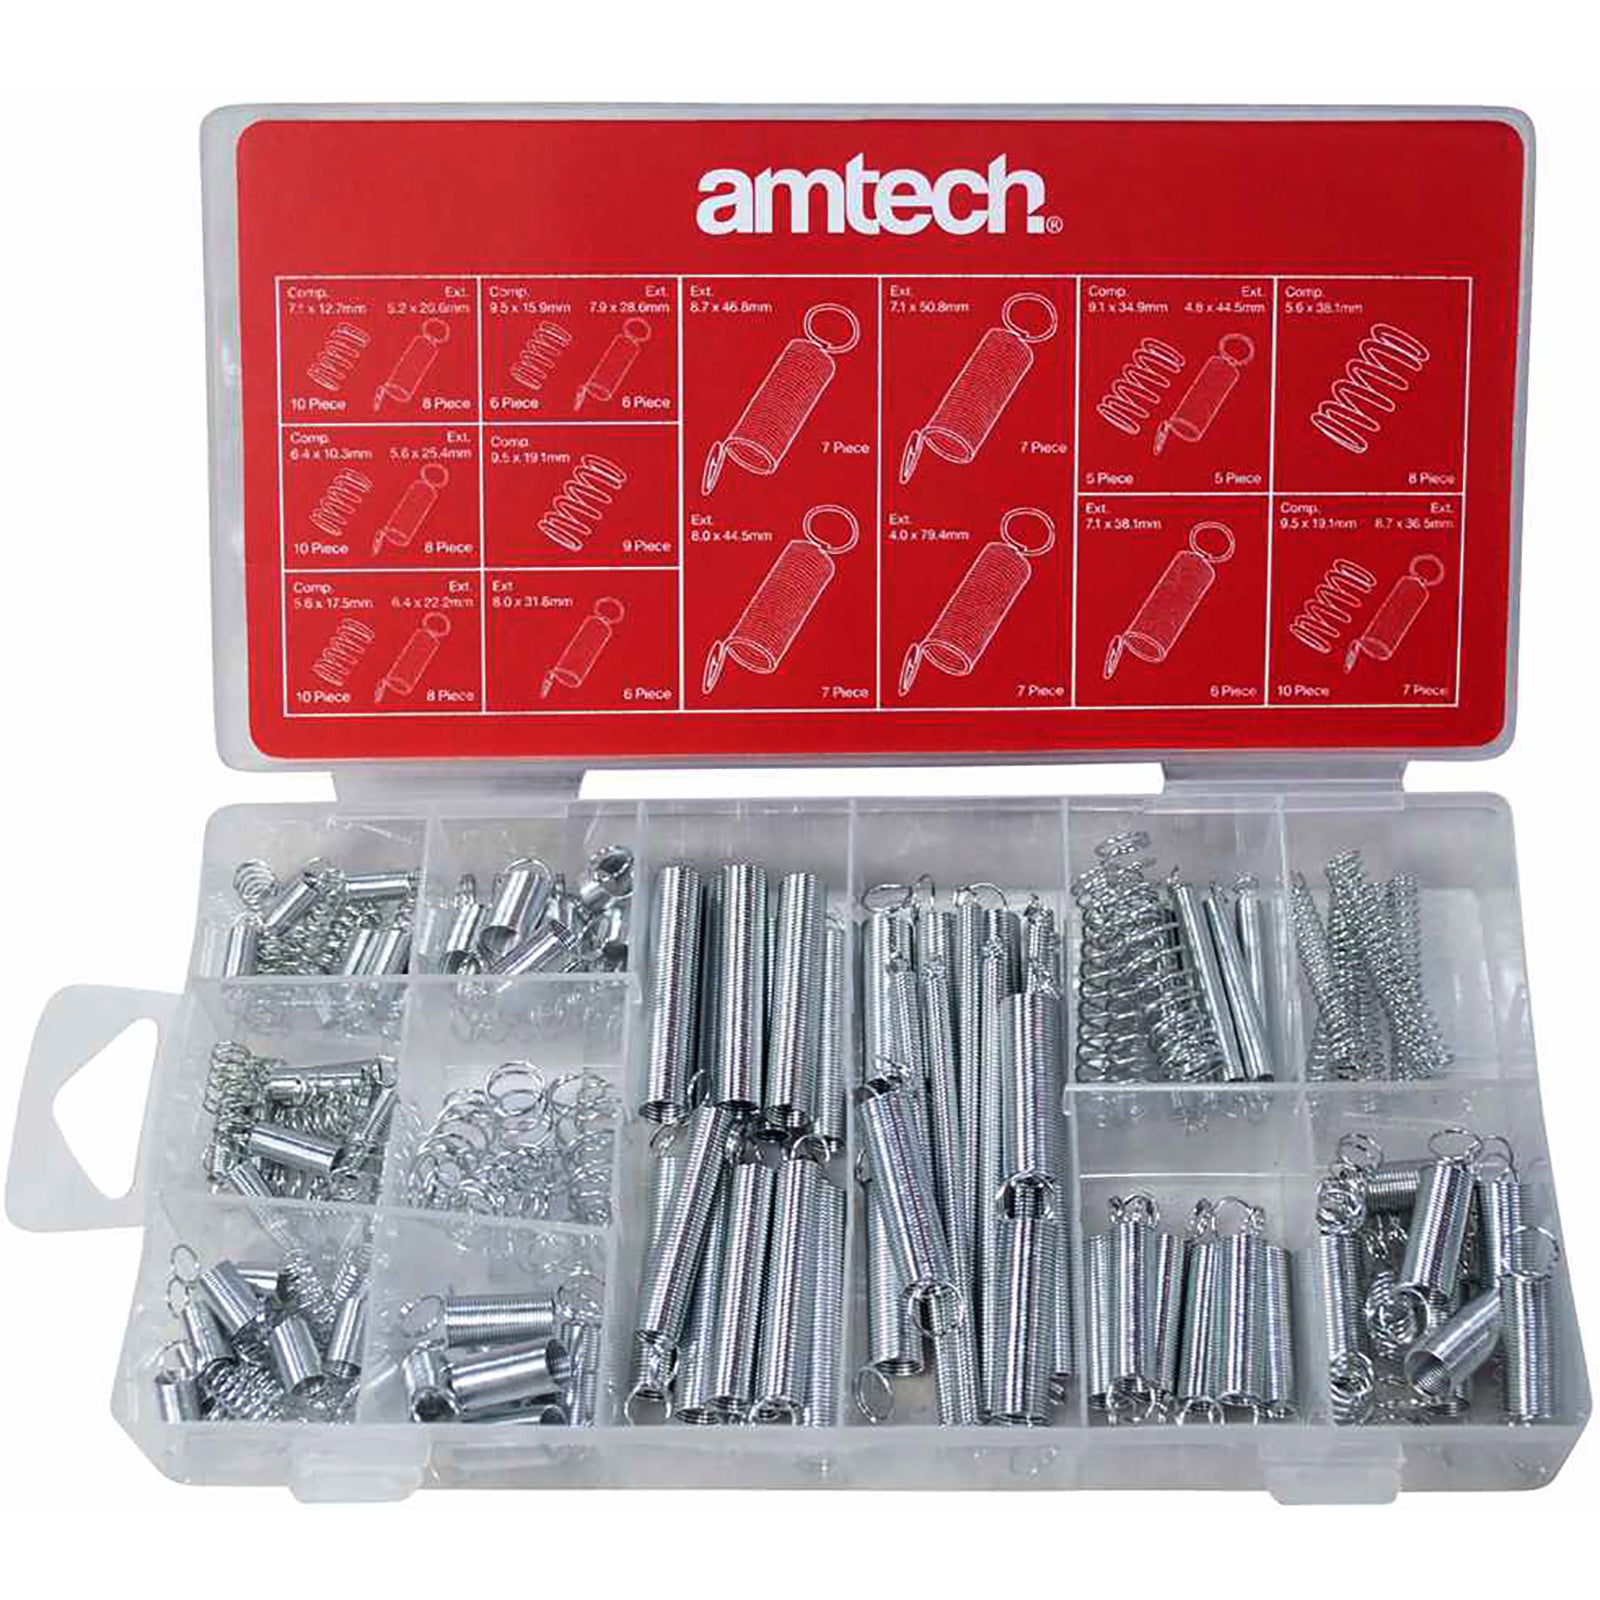 Amtech 150 Piece Spring Set Assortment Extended and Compressed